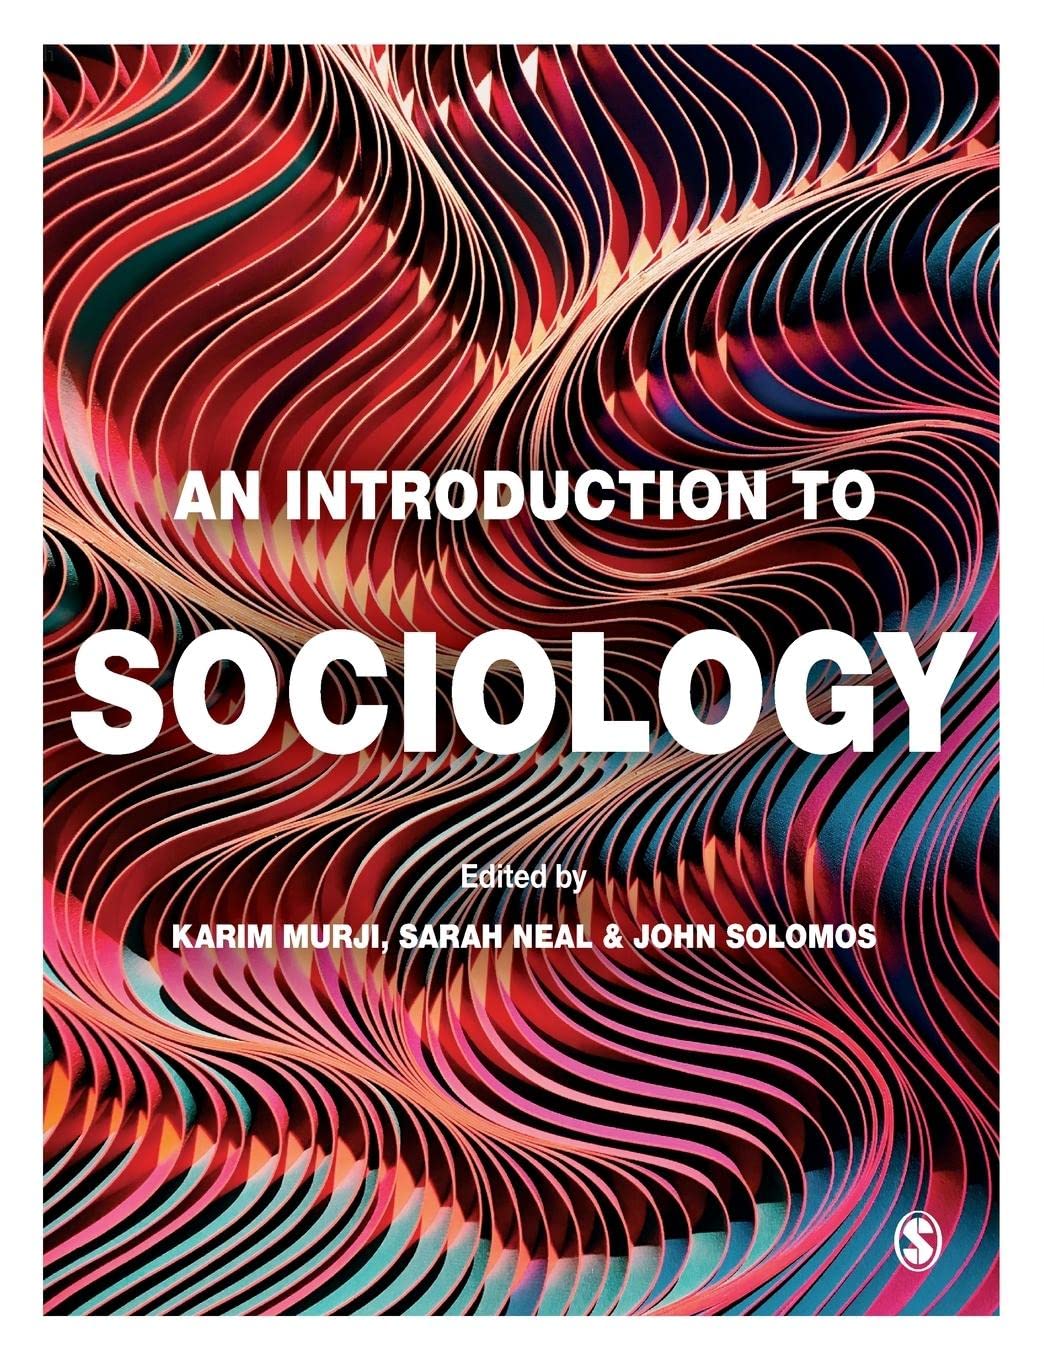 complete test bank (official) for the book An Introduction to Sociology by Karim Murji